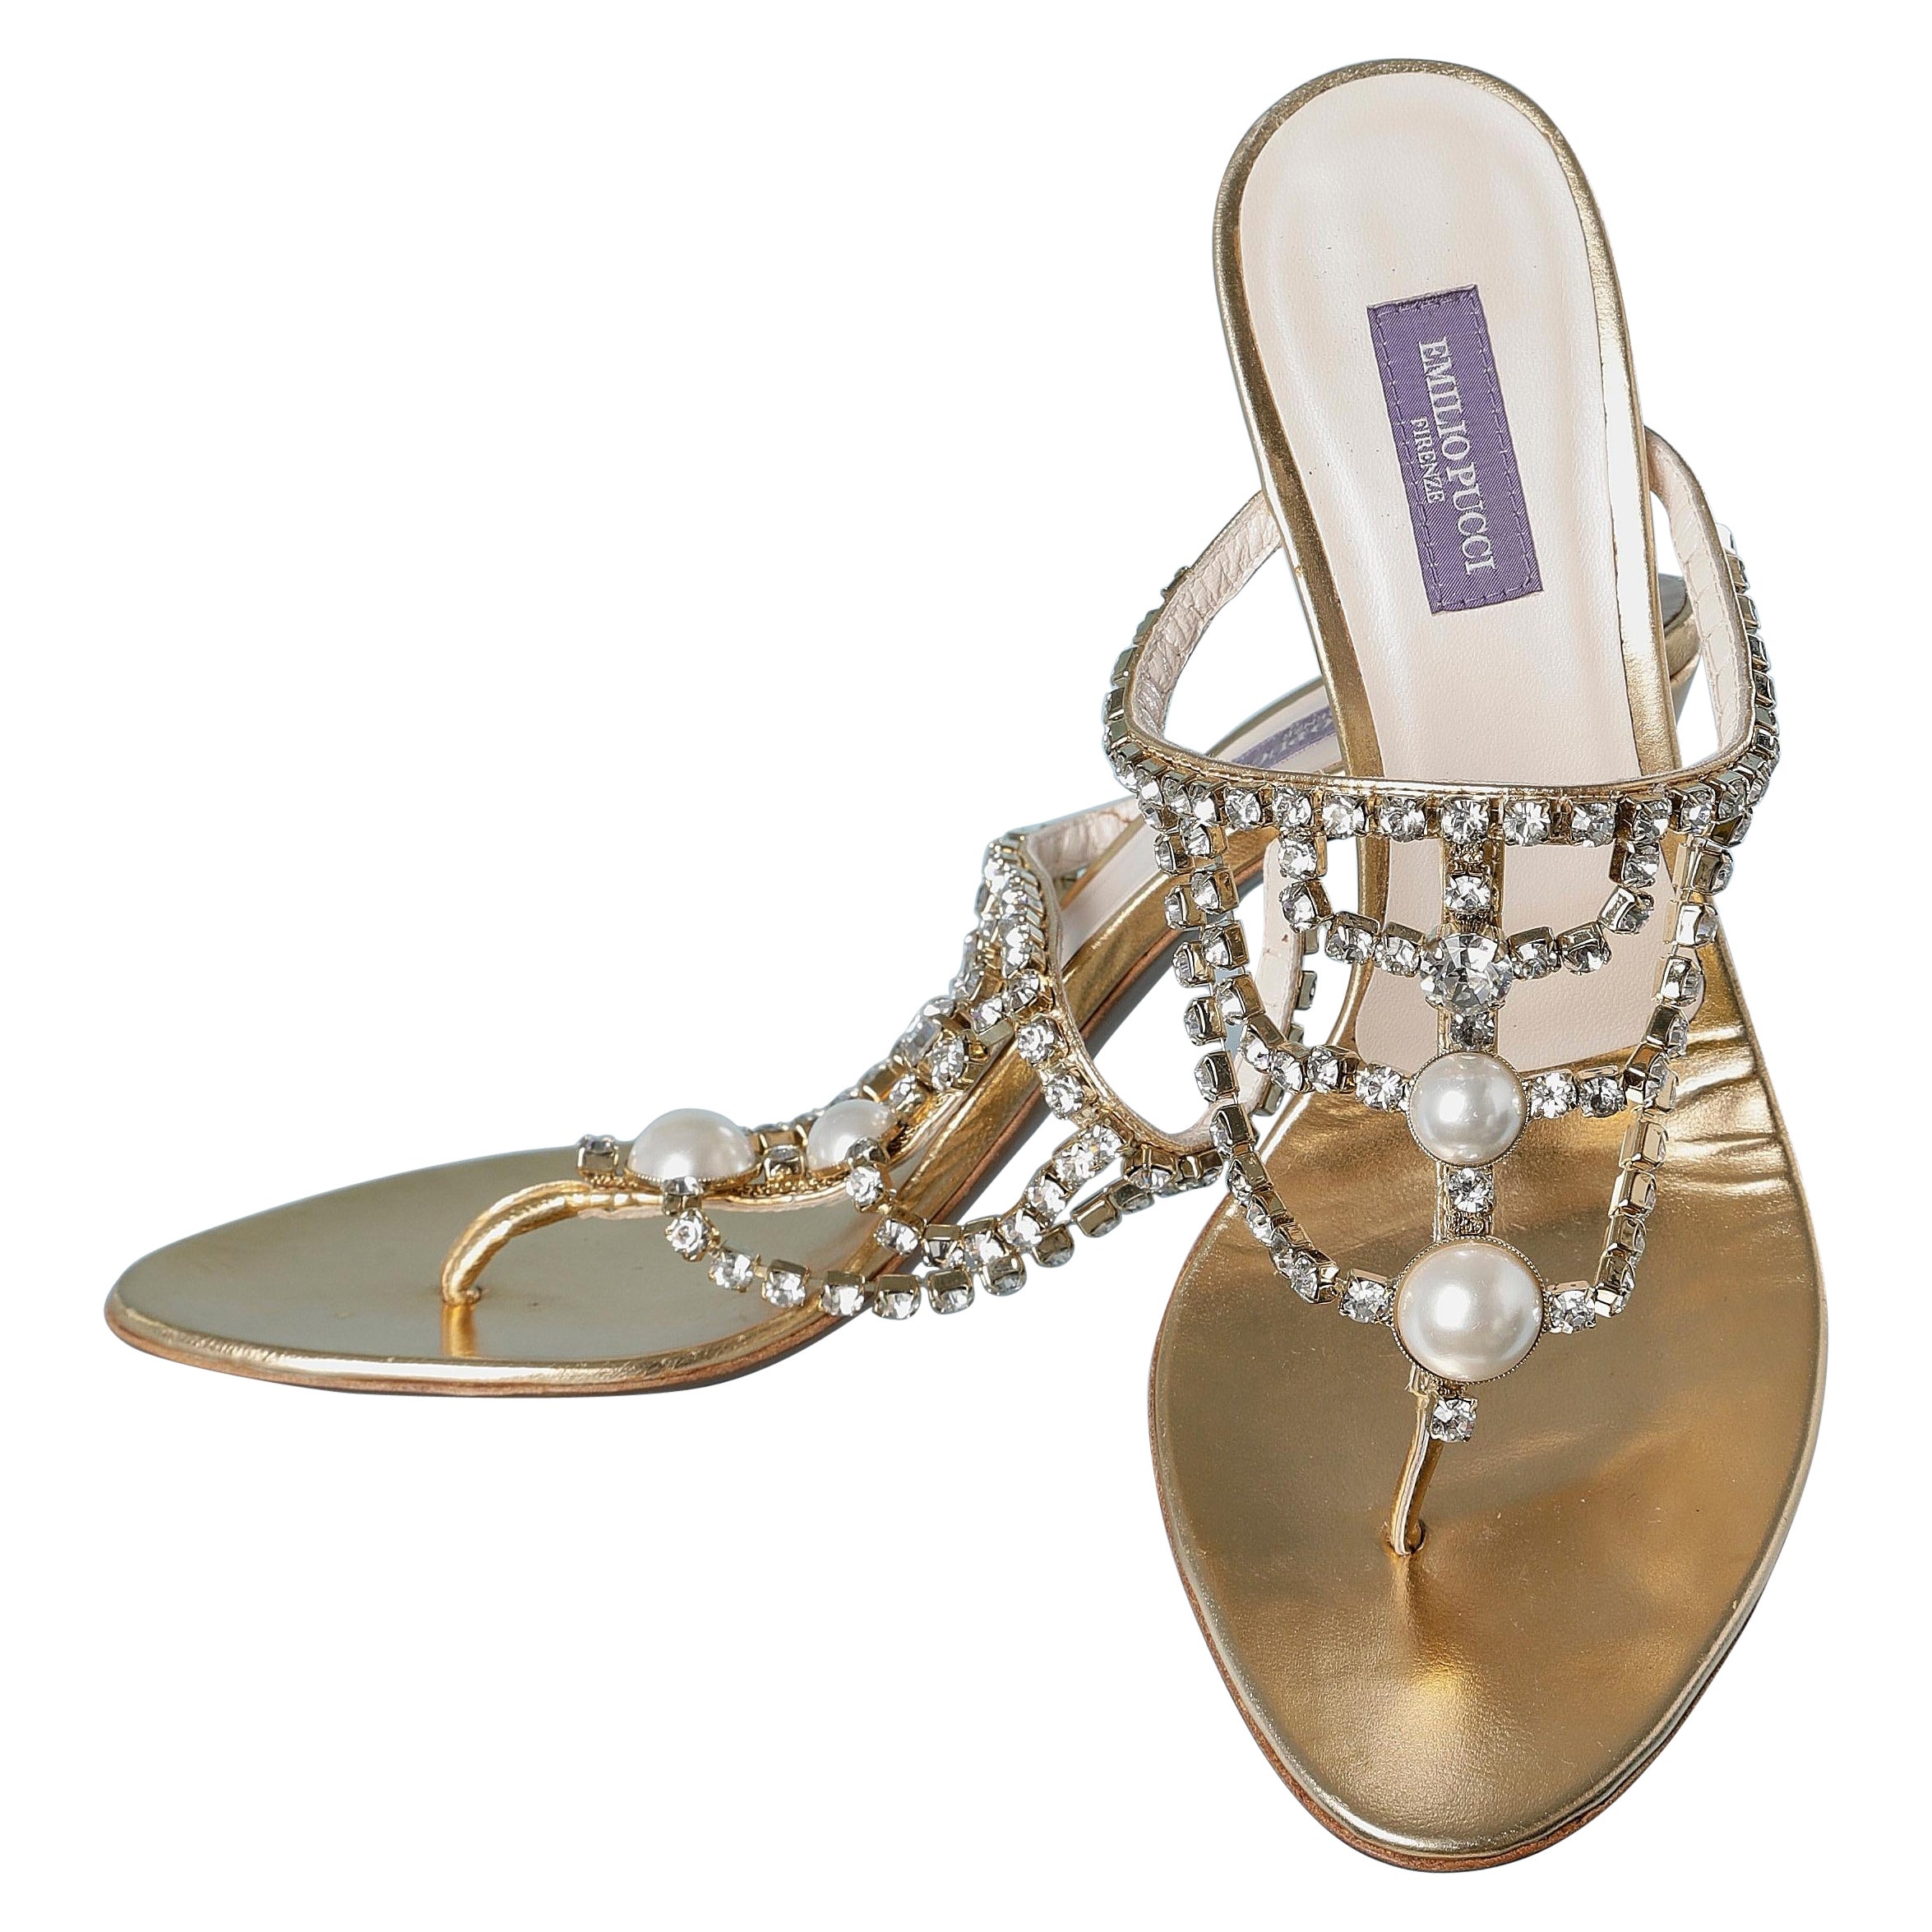 NEW Rhinestone and pearls sandals with high heels Emilio Pucci 